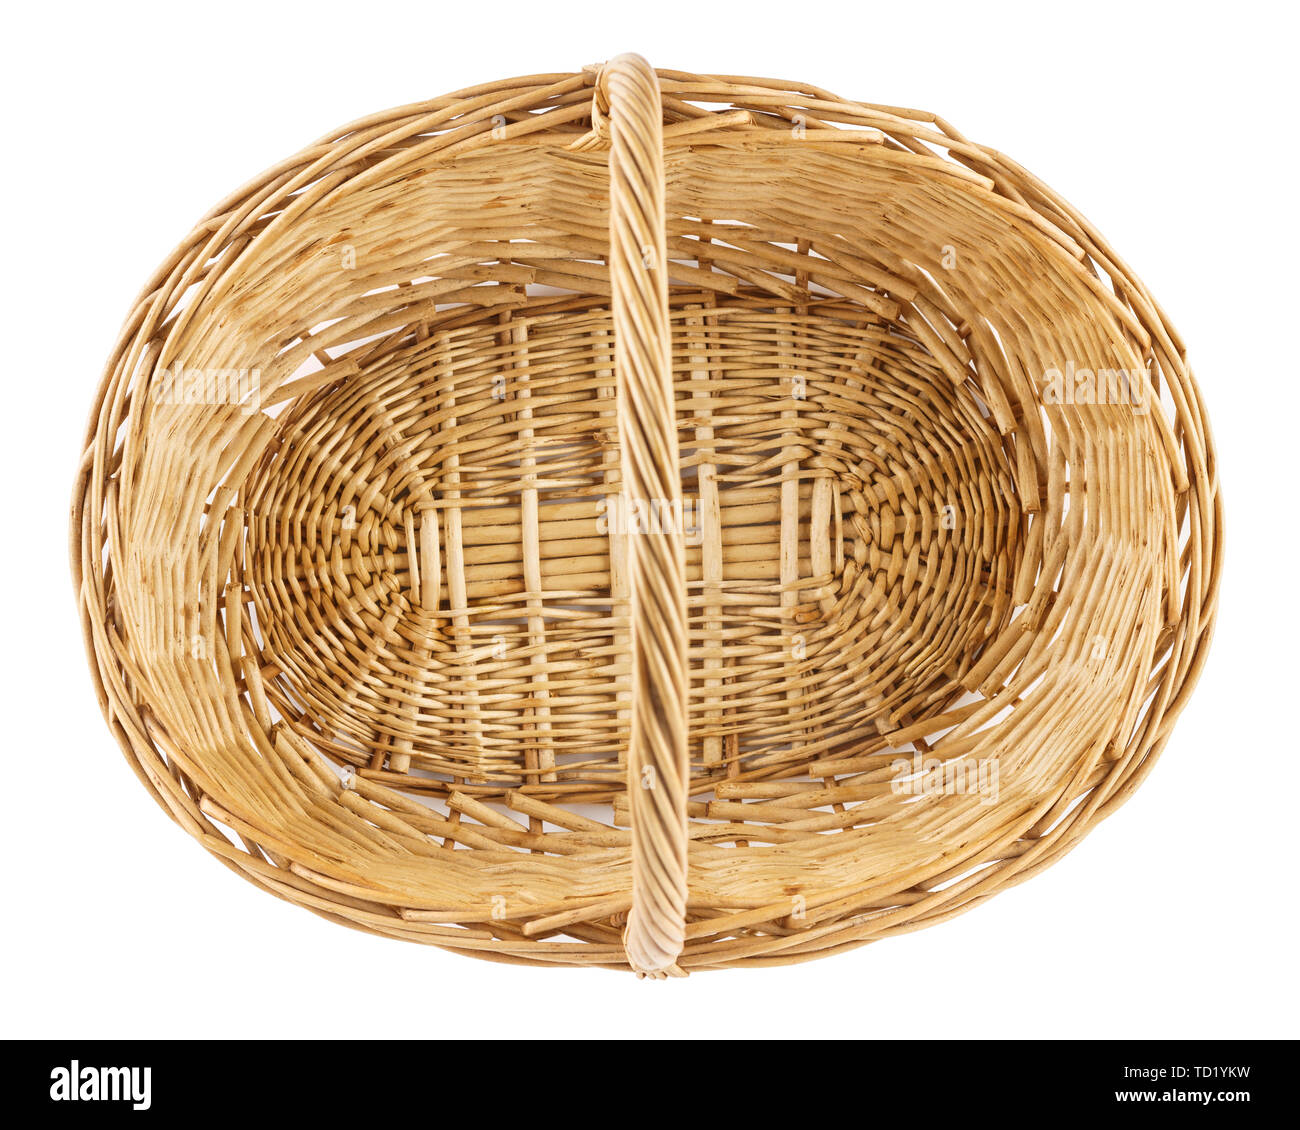 Empty wicker picnic basket isolated on white. Top view. Stock Photo